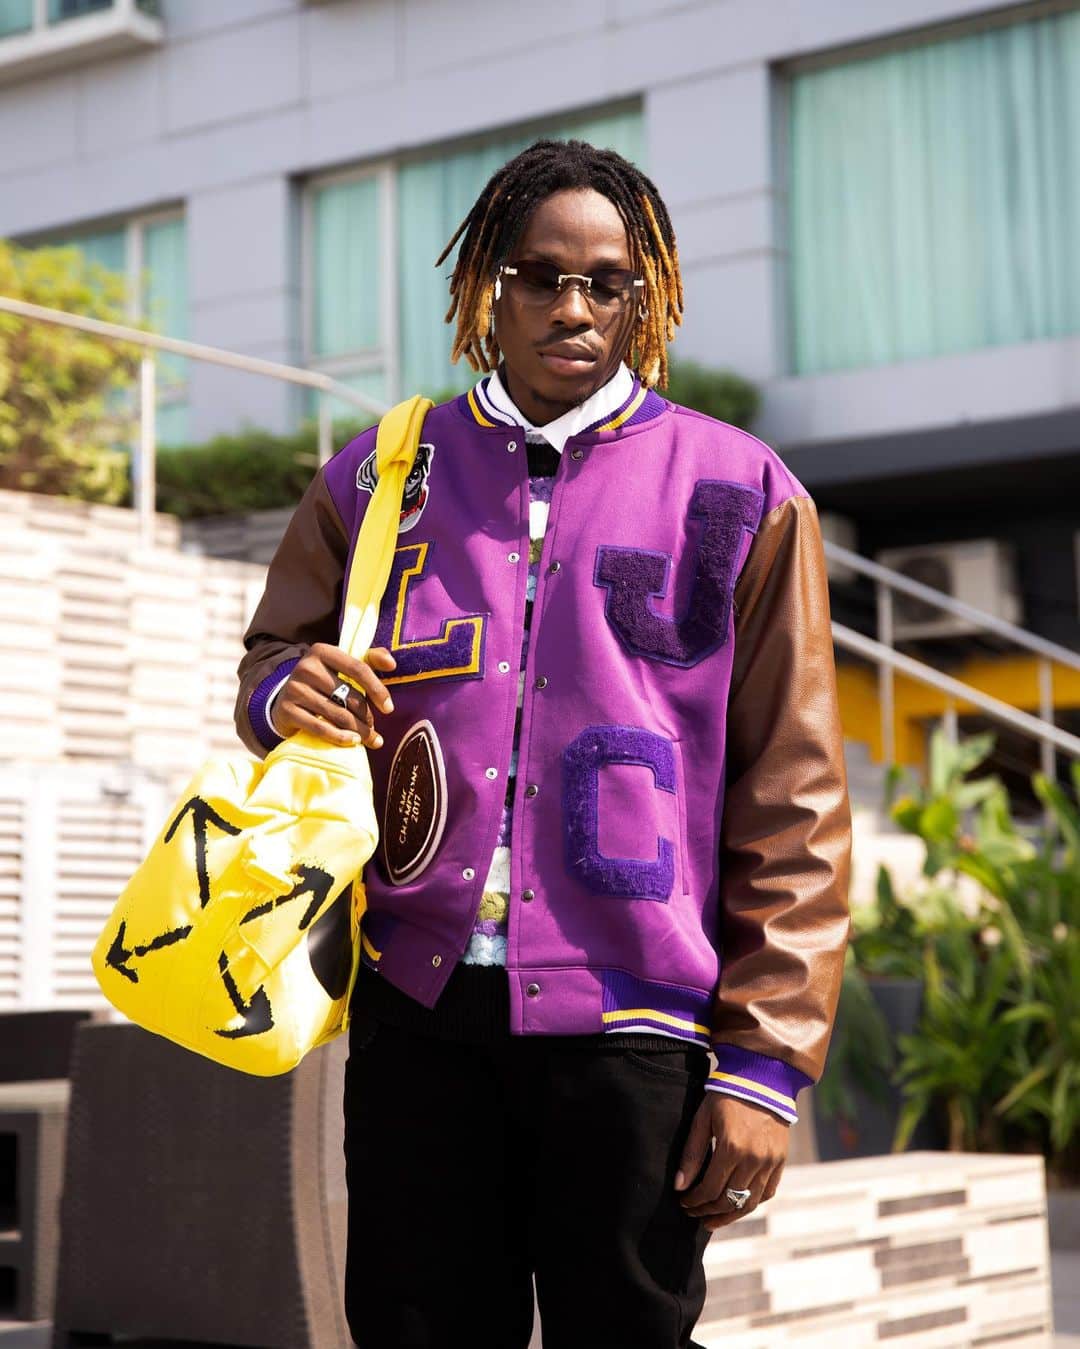 'Fame can mess you up mentally' - Singer, Fireboy DML reveals